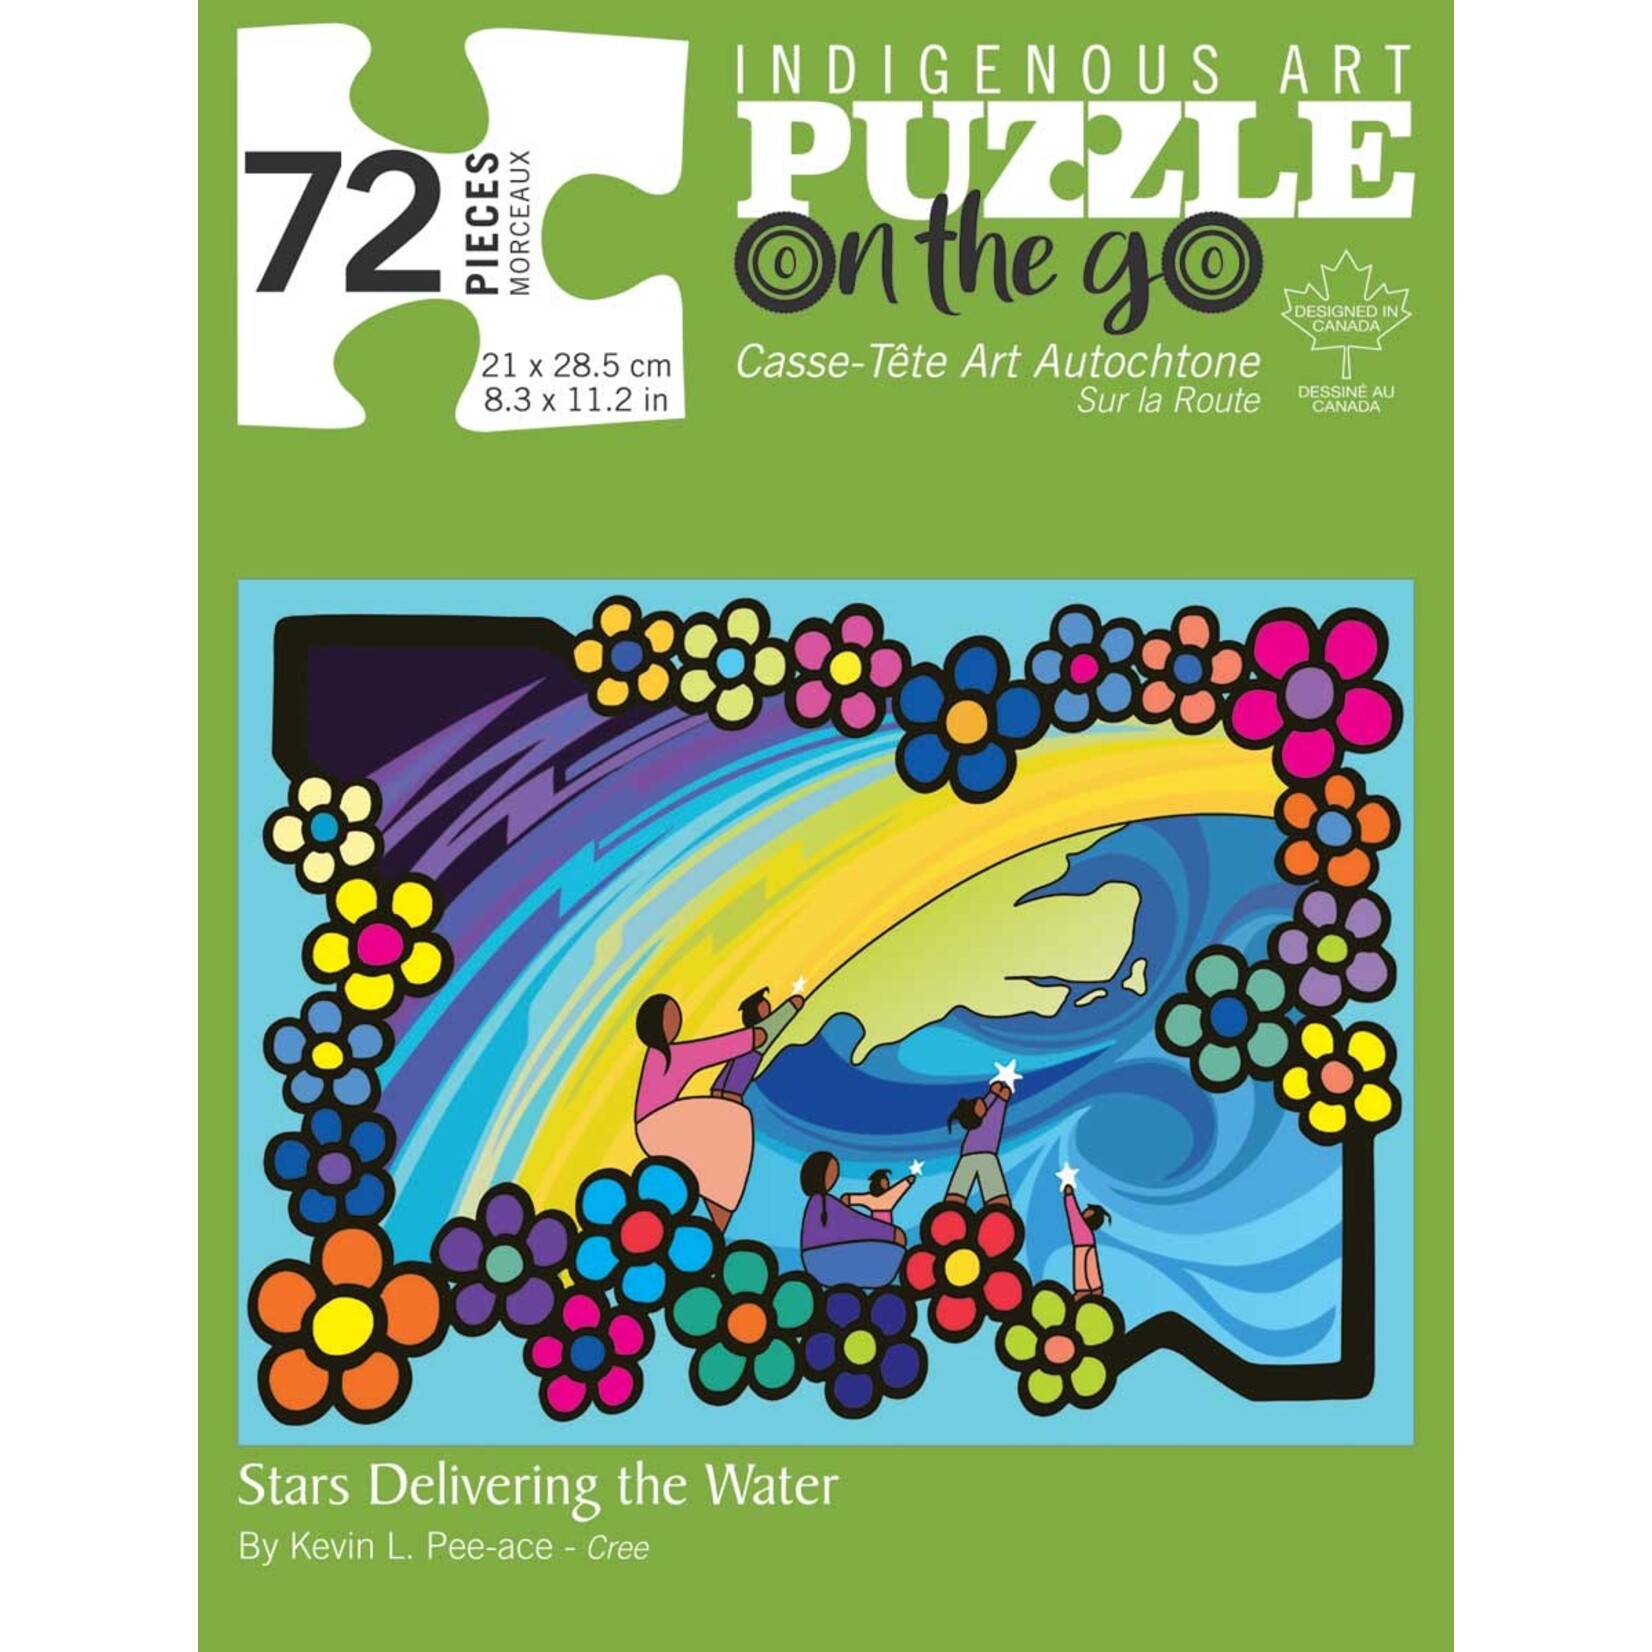 Kevin L. Pee-ace "Stars Delivering the Water" 72 Pieces Puzzle